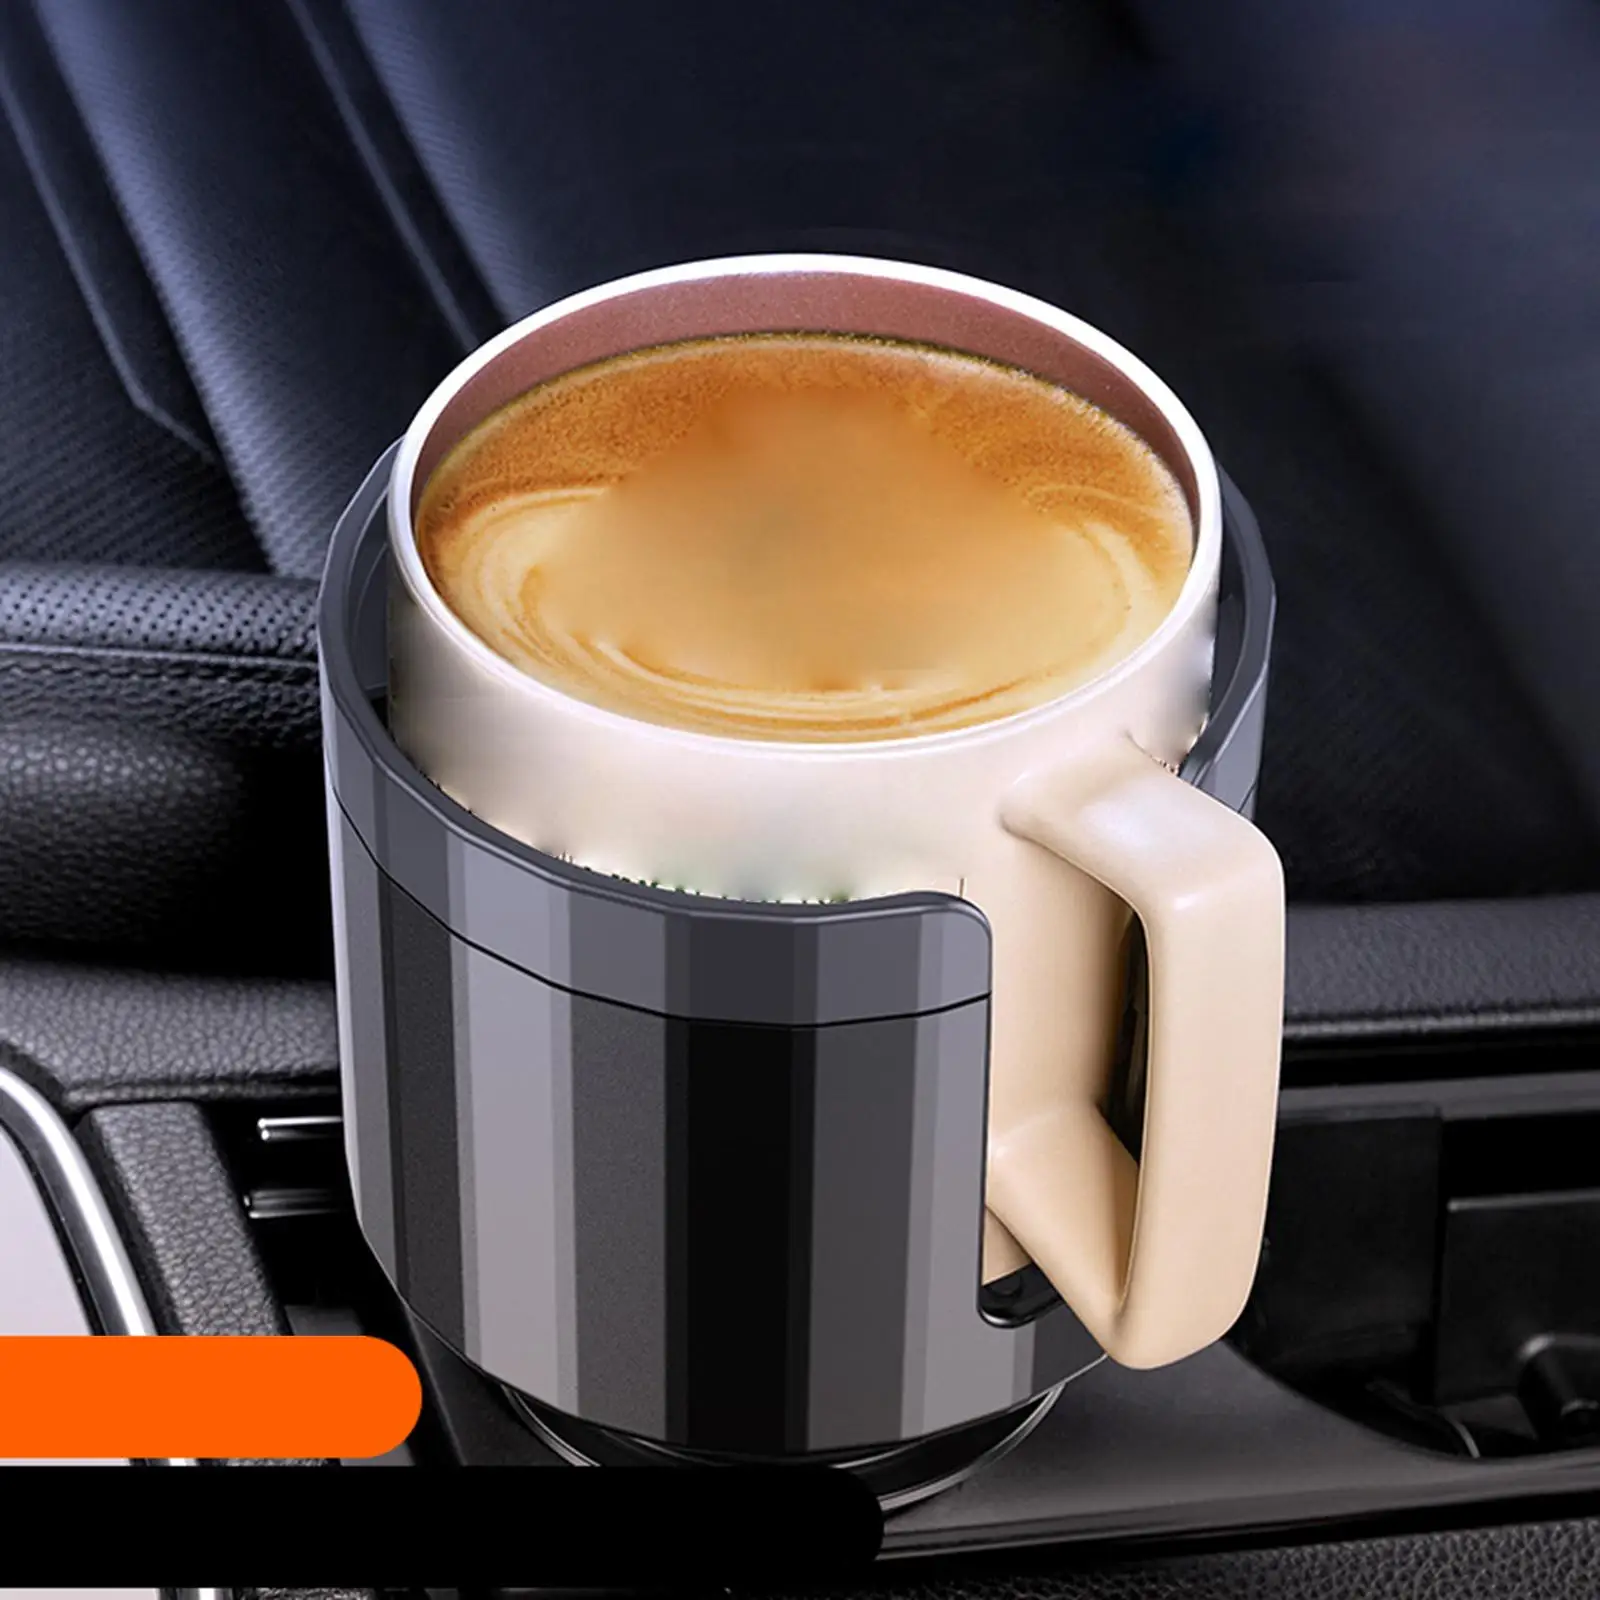 Car Cup Holder Expander Adapter Organizer Adjustable Cup Holder Insert Water Cup Holder Fit for Cups Durable High Performance